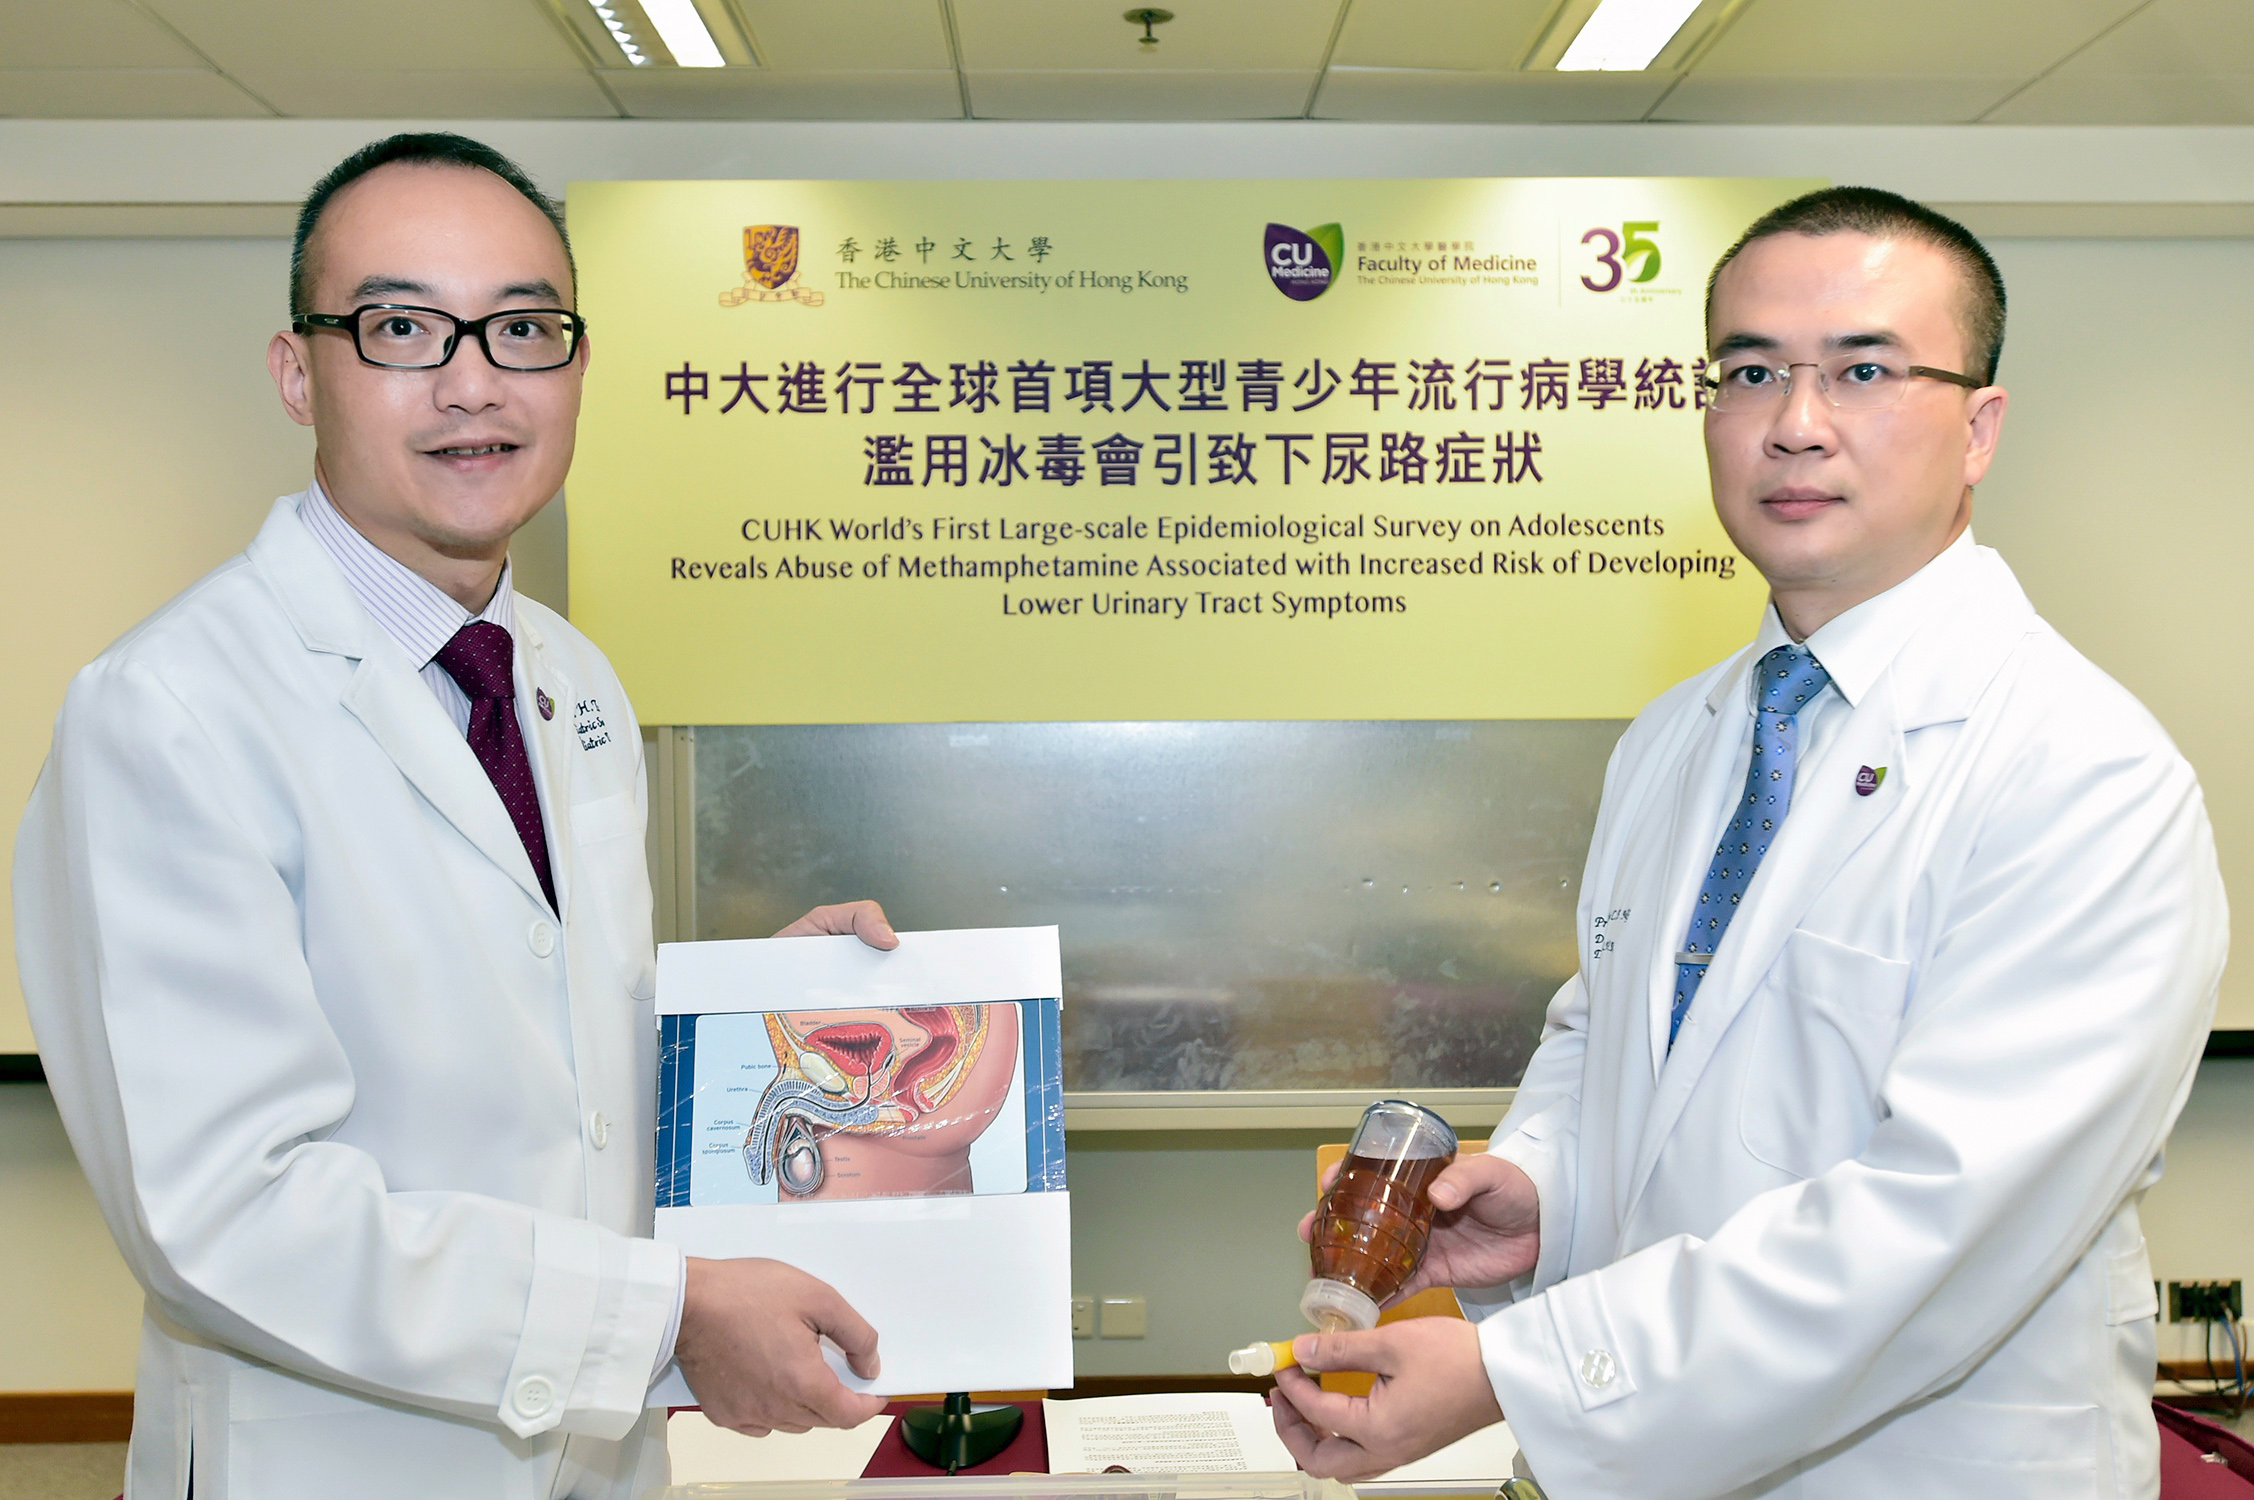 Featured are left Dr. Yuk Him TAM, Clinical Associate Professor (honorary), Division of Paediatric Surgery & Paediatric Urology, Department of Surgery, Faculty of Medicine, CUHK and Co-Director of Youth Urological Treatment Clinic (Left) and Prof. Chi Fai NG, Professor, Division of Urology, Department of Surgery, Faculty of Medicine, CUHK and Co-Director of Youth Urological Treatment Clinic.